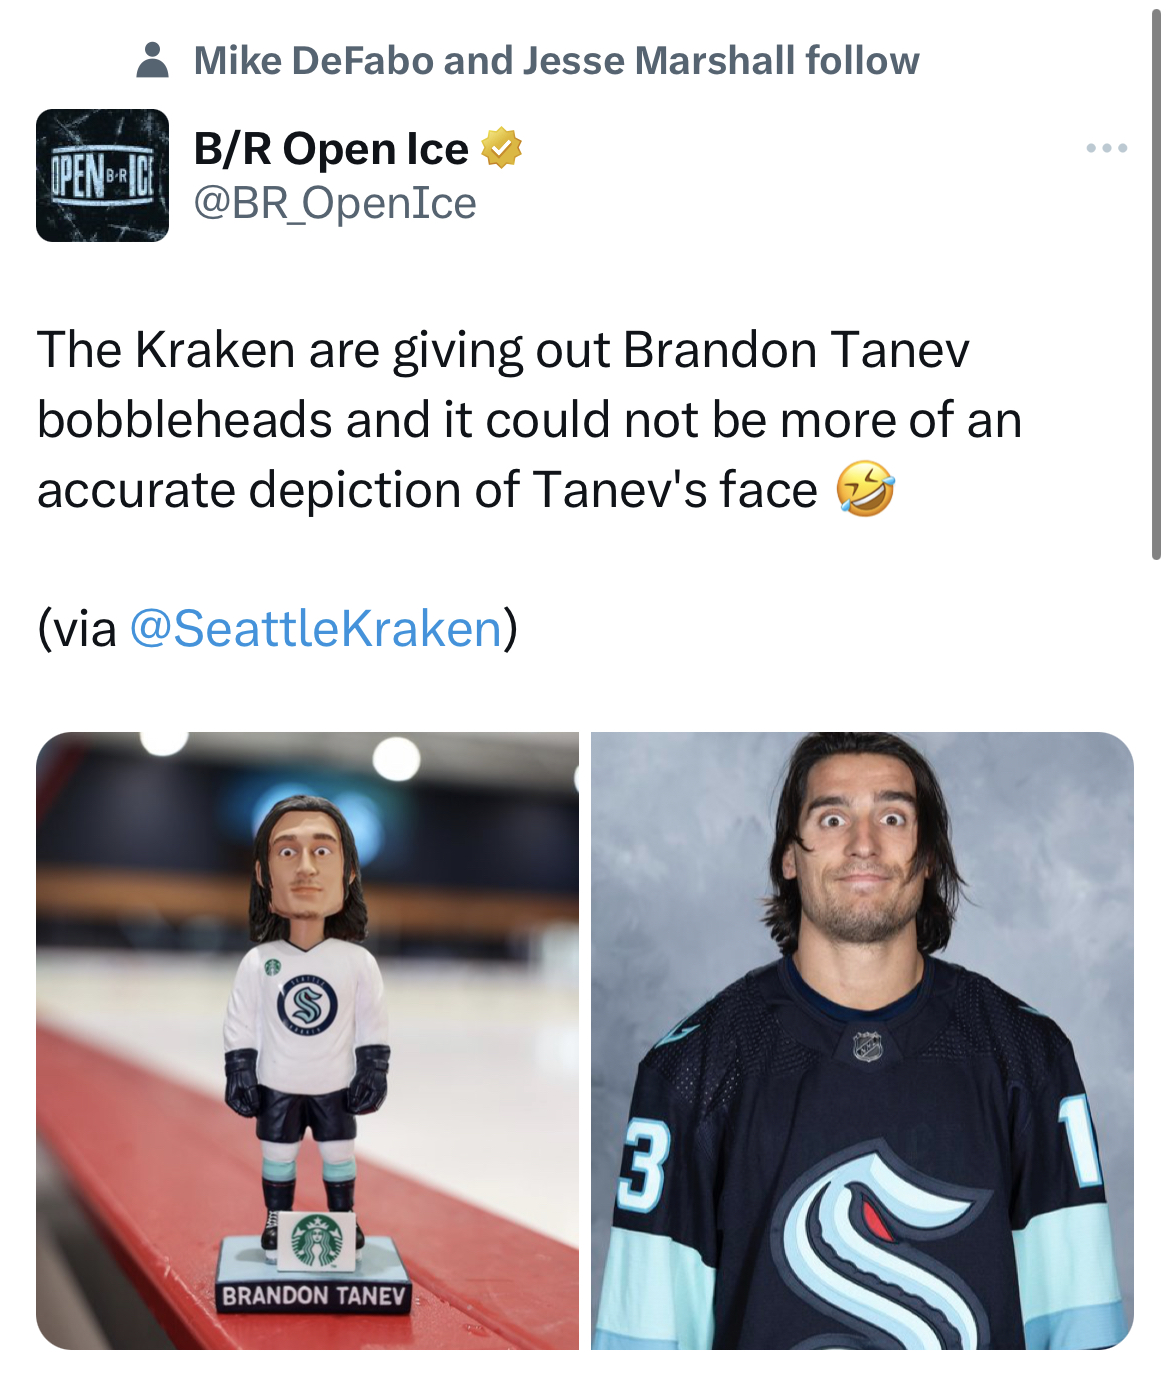 savage tweets - media - Mike DeFabo and Jesse Marshall BR Open Ice The Kraken are giving out Brandon Tanev bobbleheads and it could not be more of an accurate depiction of Tanev's face via Brandon Tanev 3